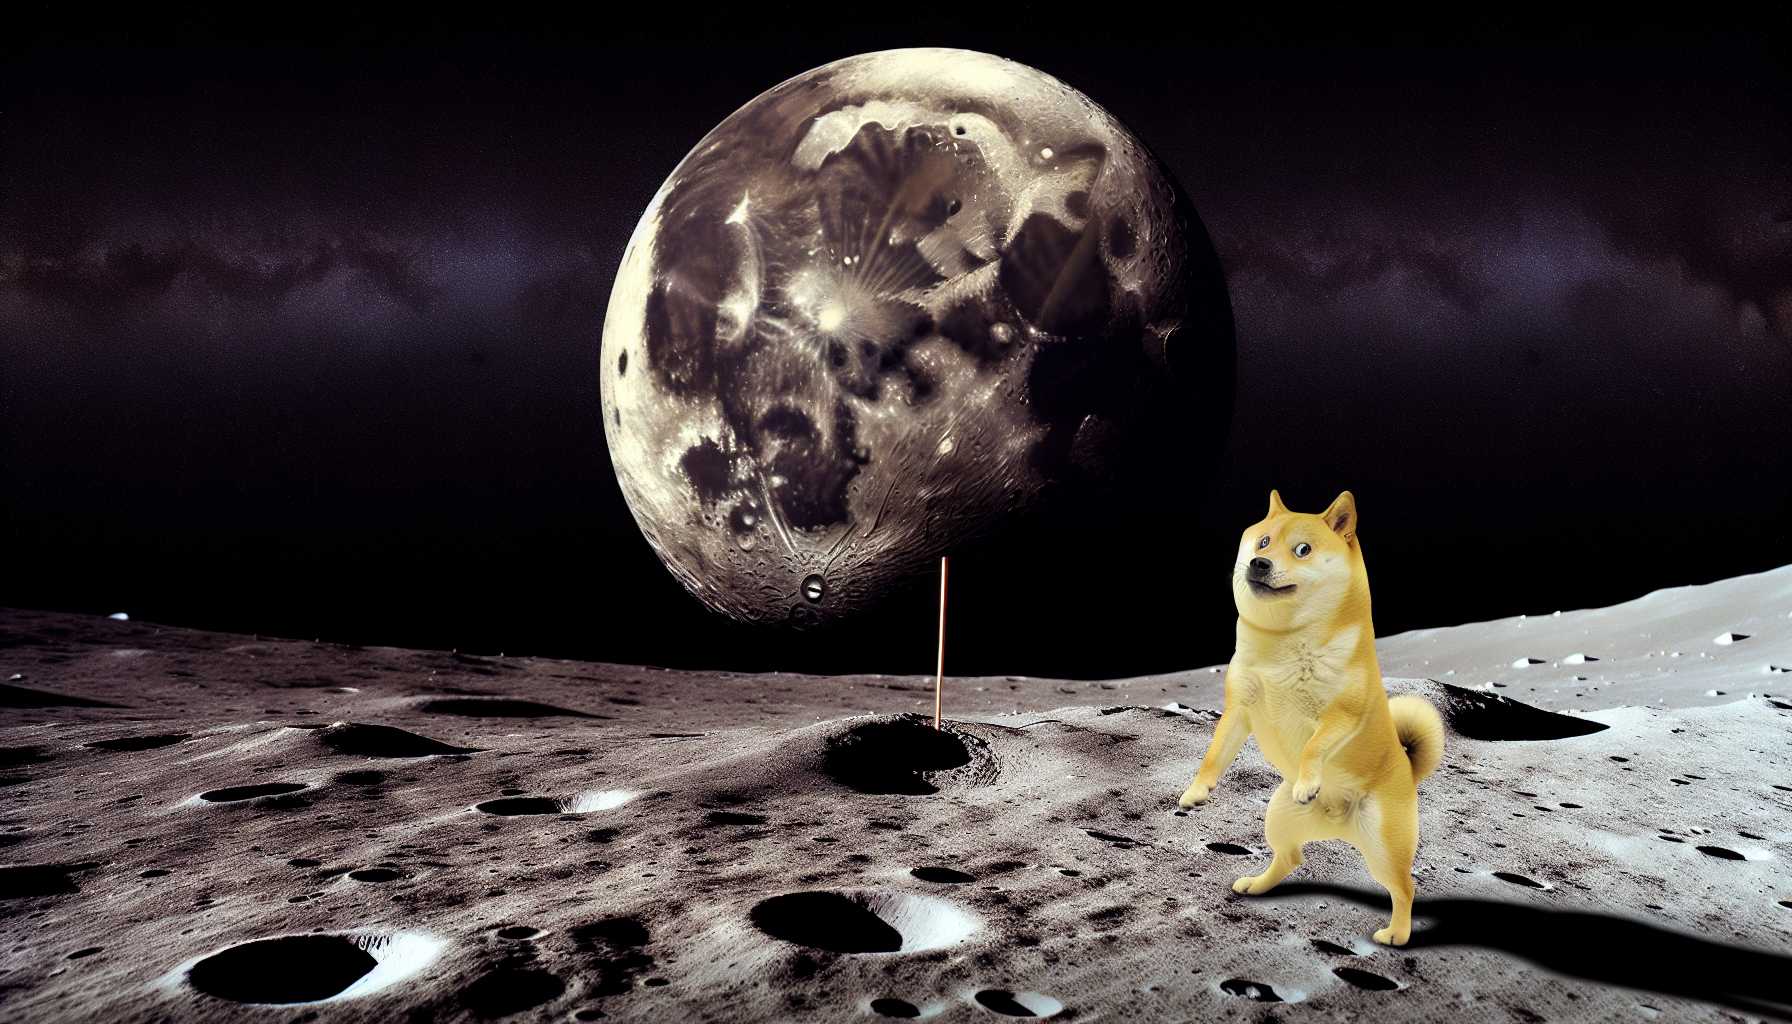 A Dogecoin logo humorously planted on the moon’s soil